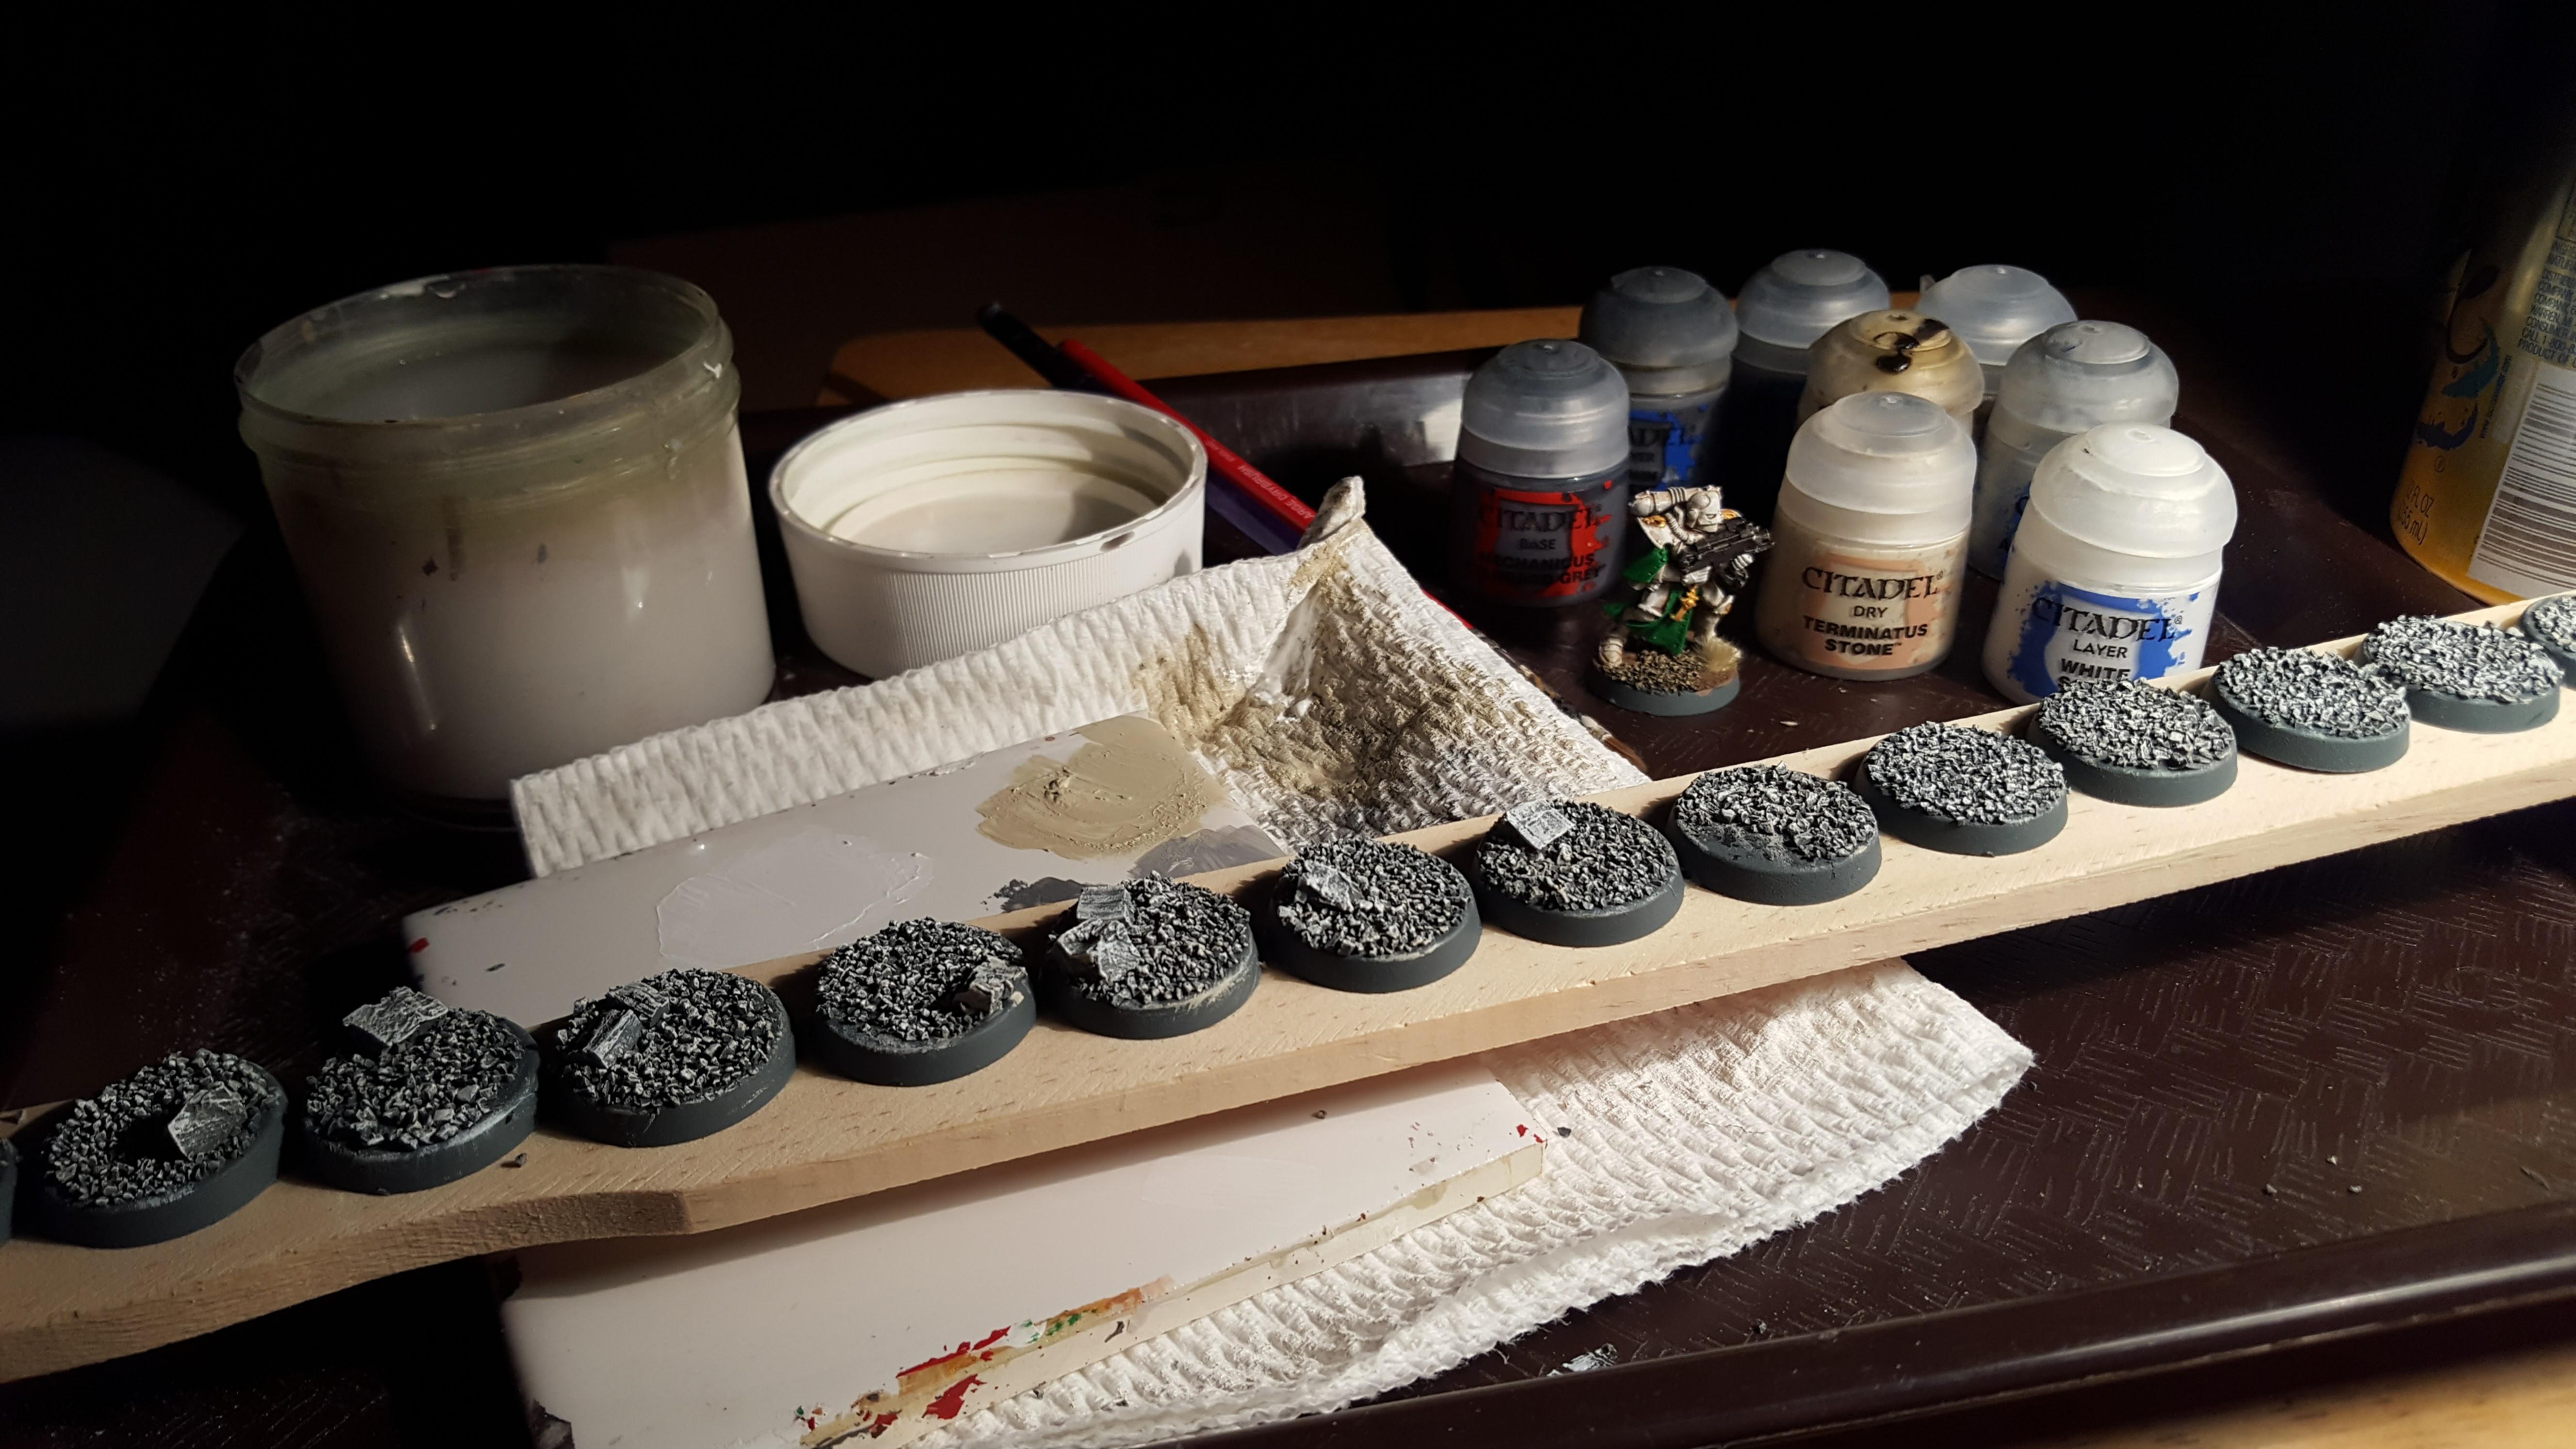 Mass-producing bases on a paint stirrer: PVA glue, cork and gravel, Mechanicus Grey spray, Terminatus Stone and White Scar drybrush, Agrax Earth wash